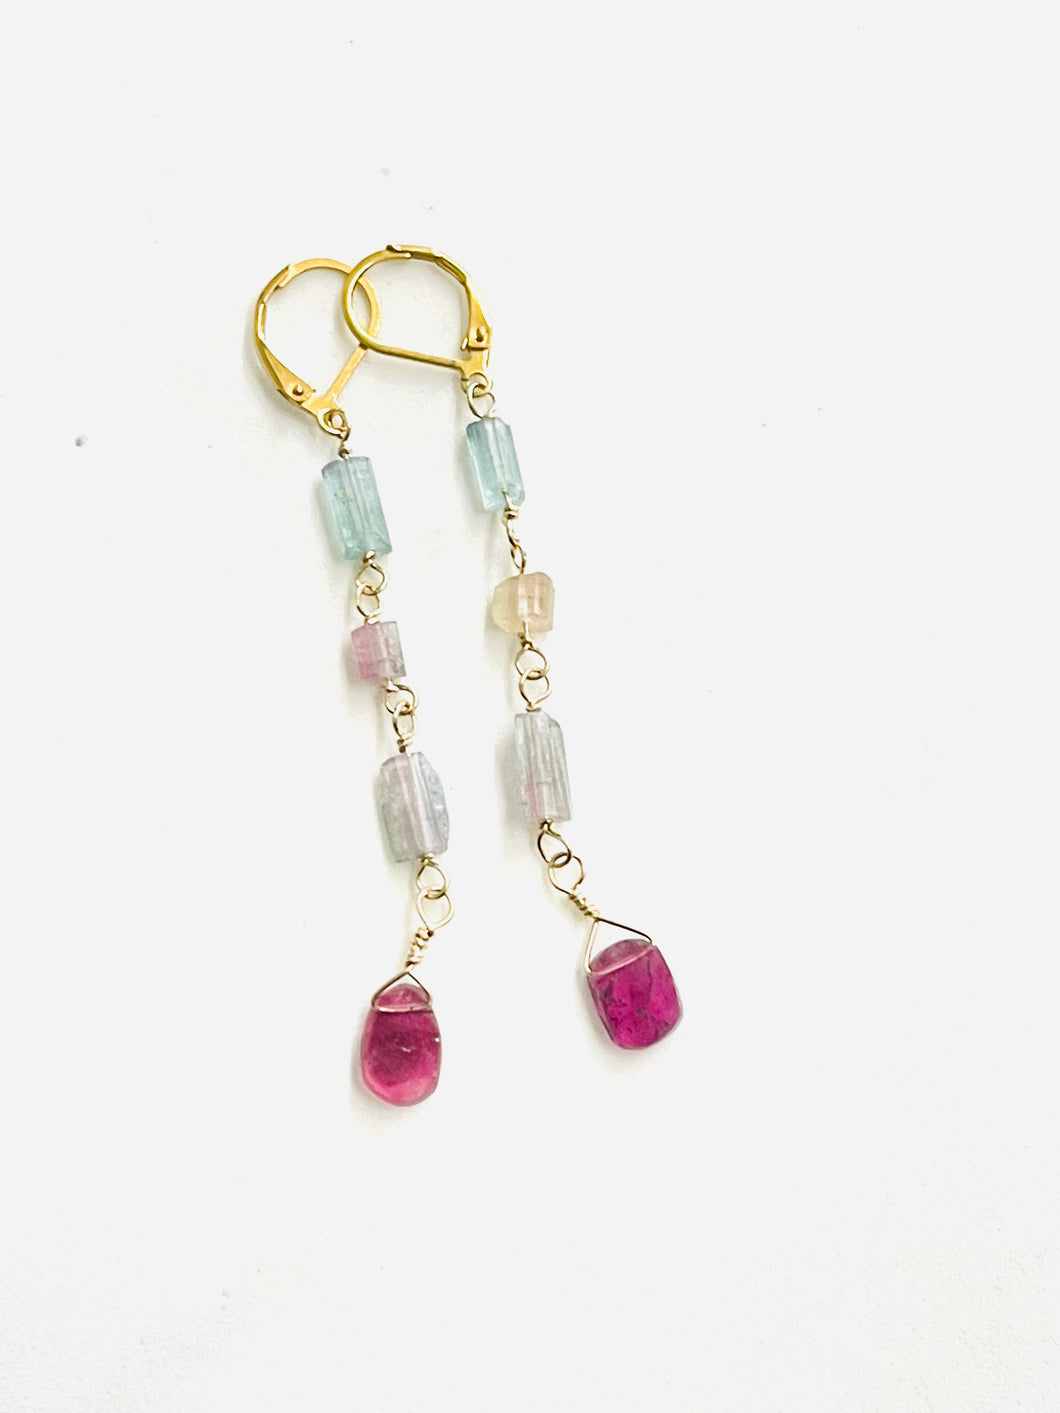 Earrings with various Tourmaline beads